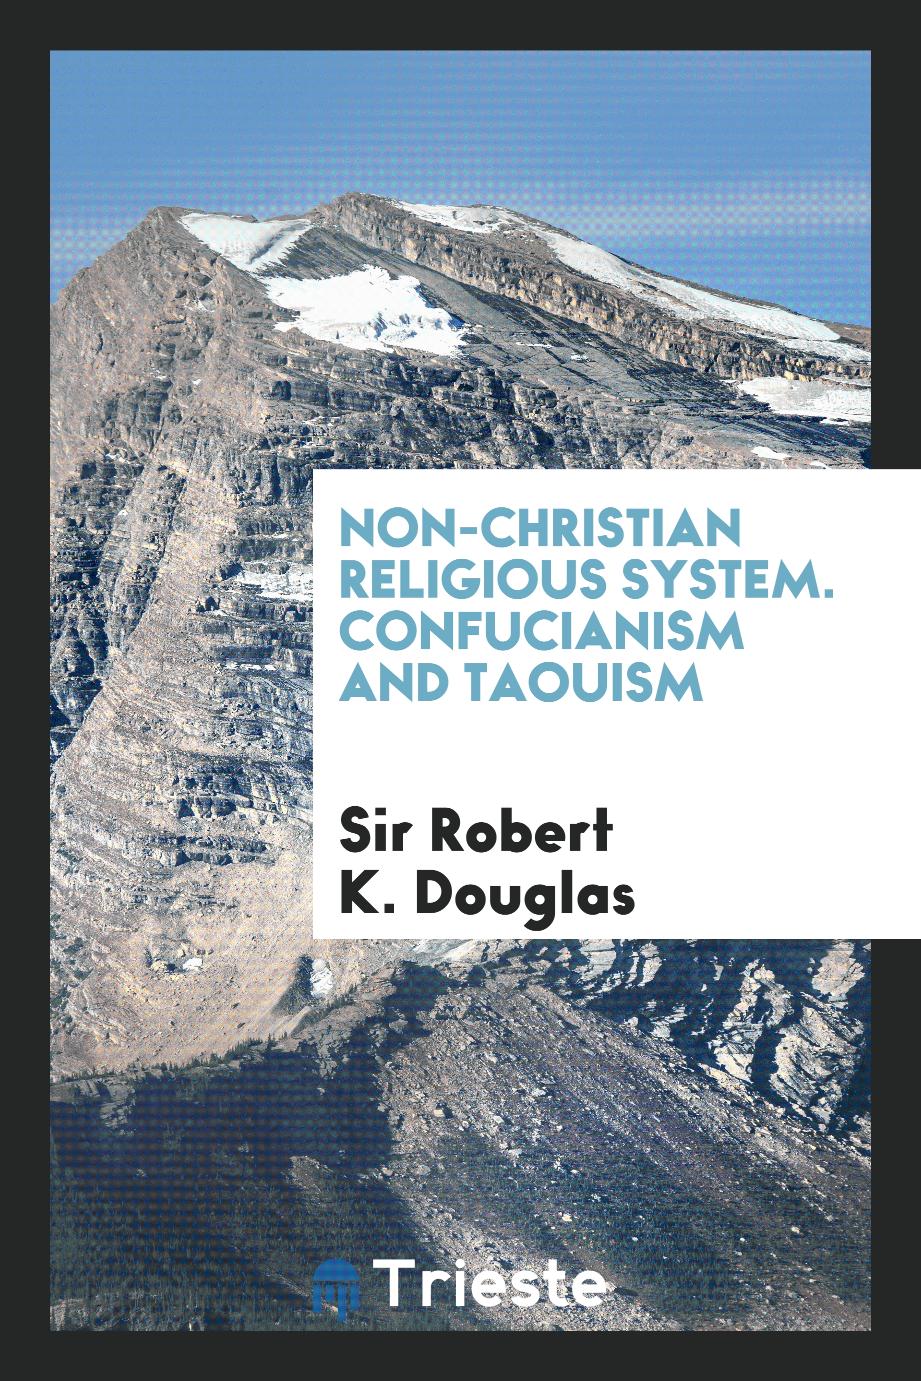 Non-Christian Religious System. Confucianism and Taouism